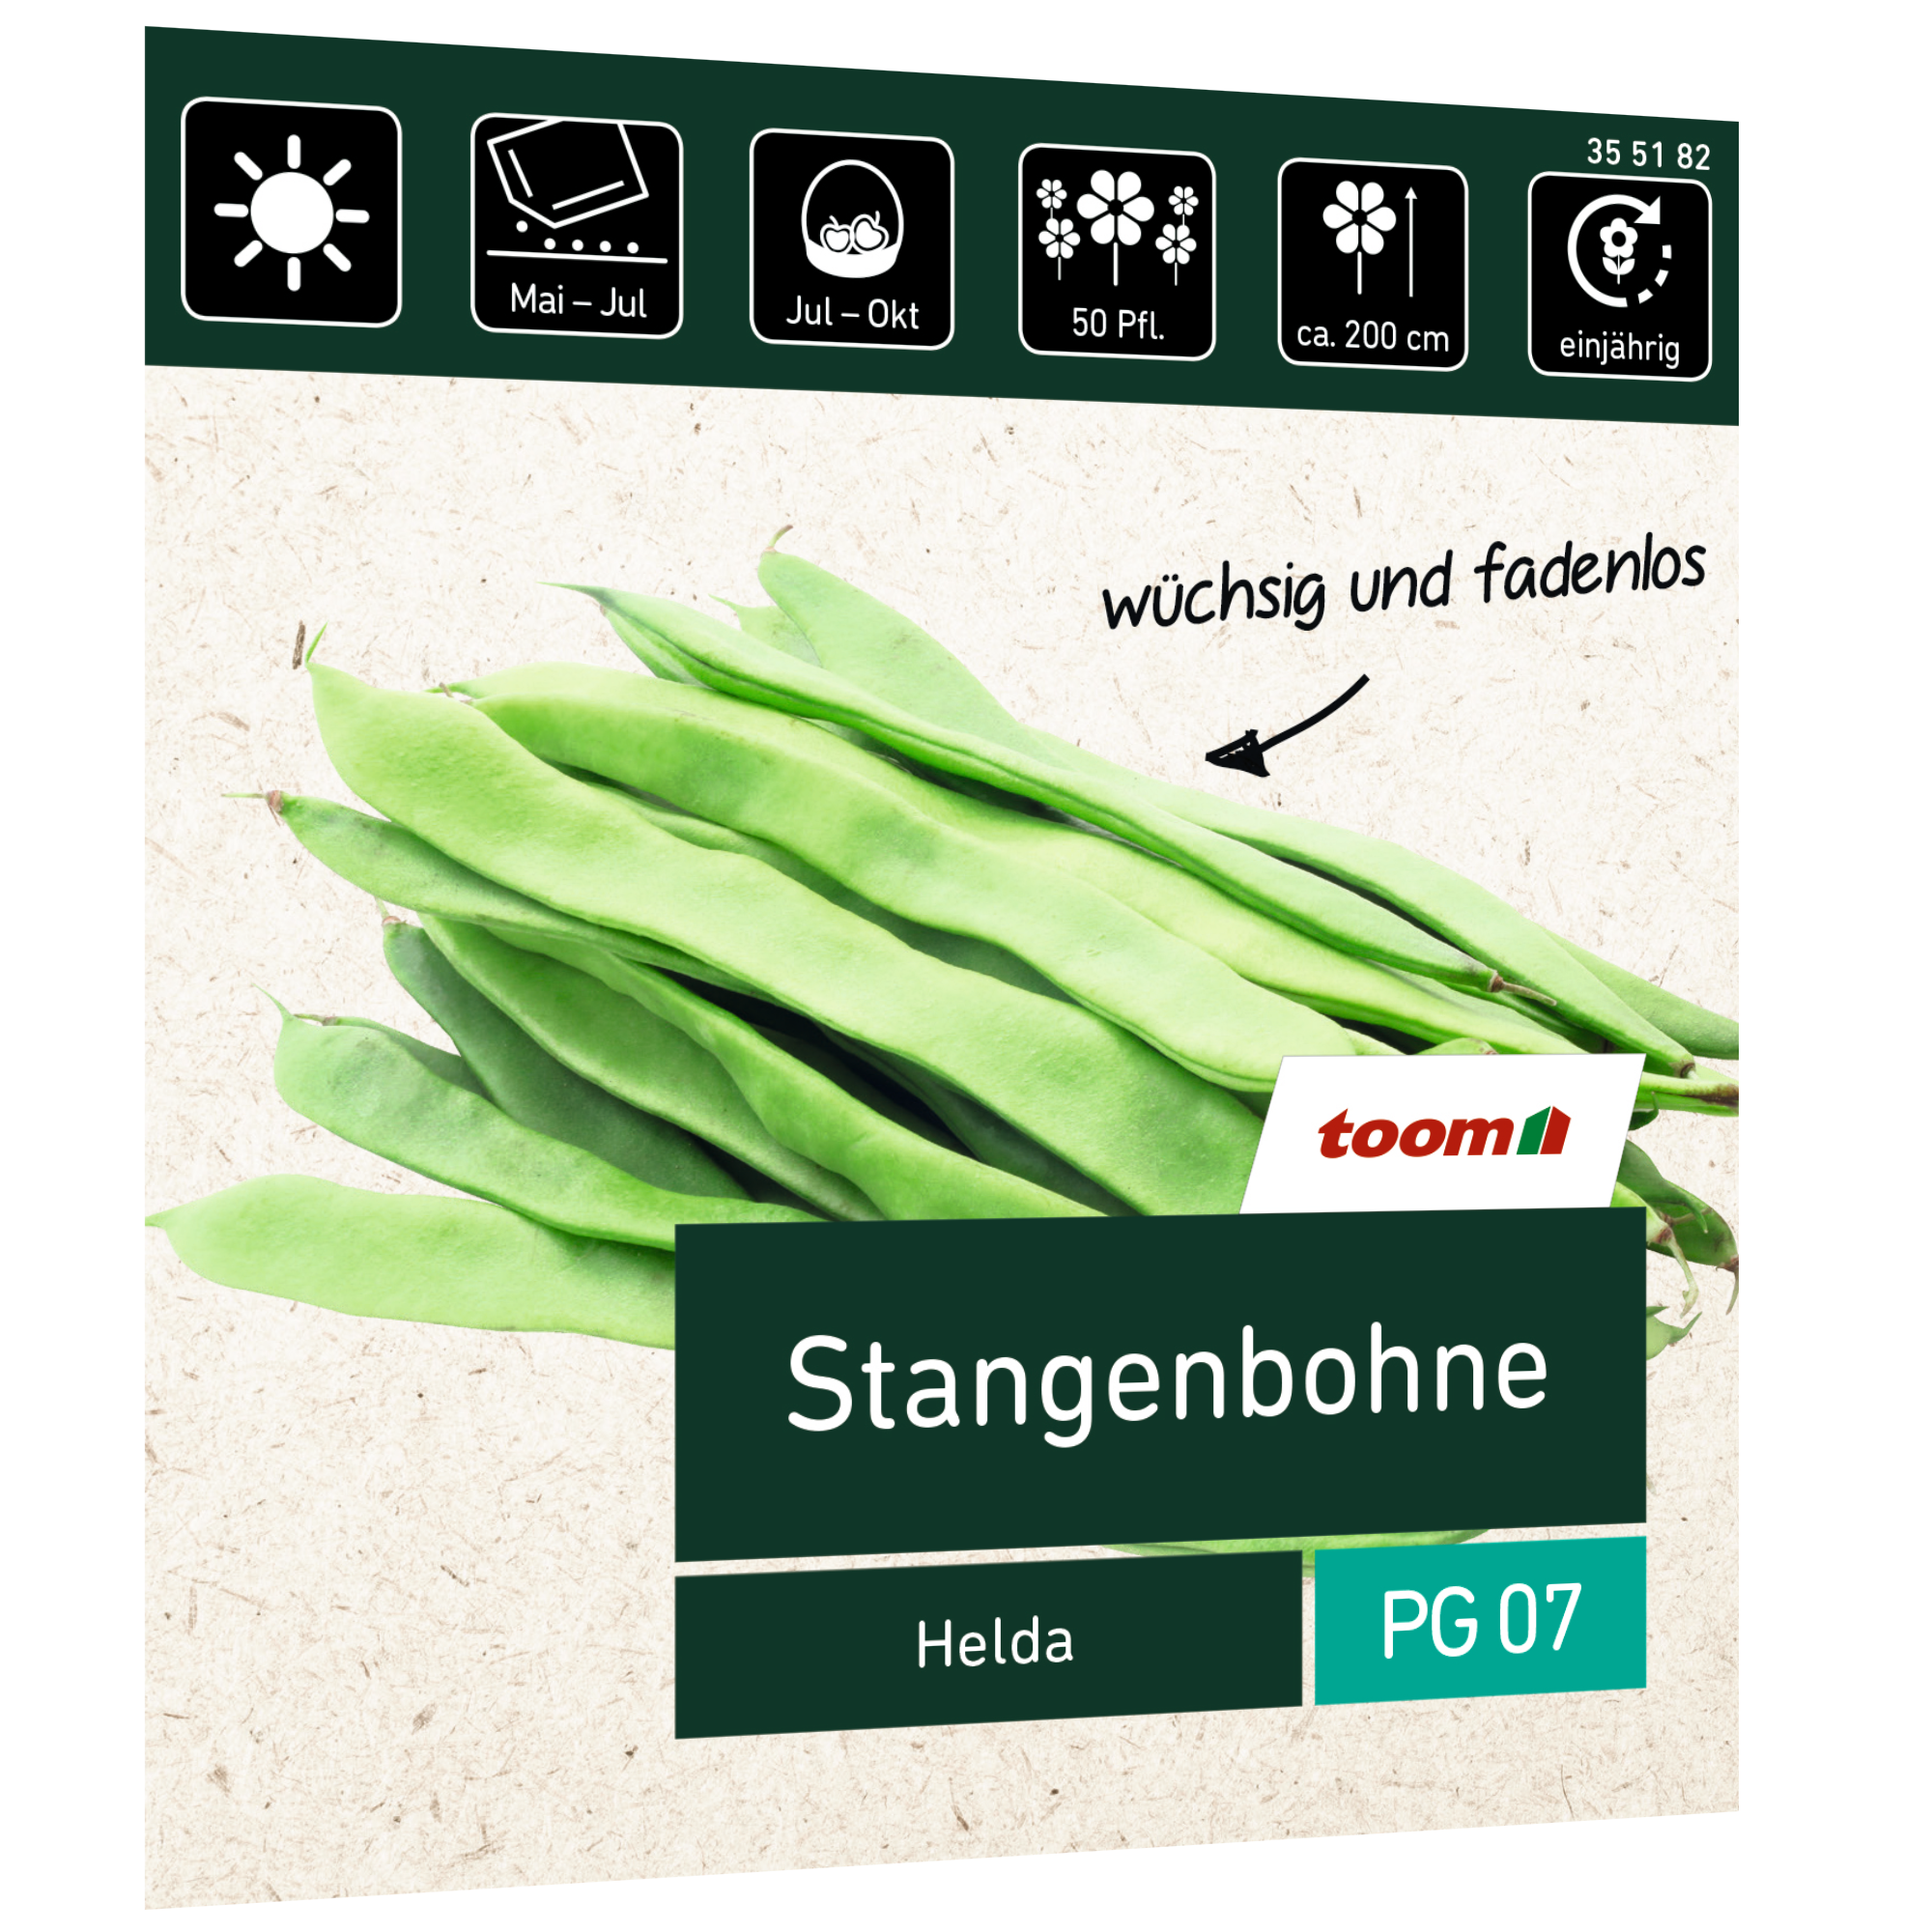 Stangenbohne 'Helda' + product picture